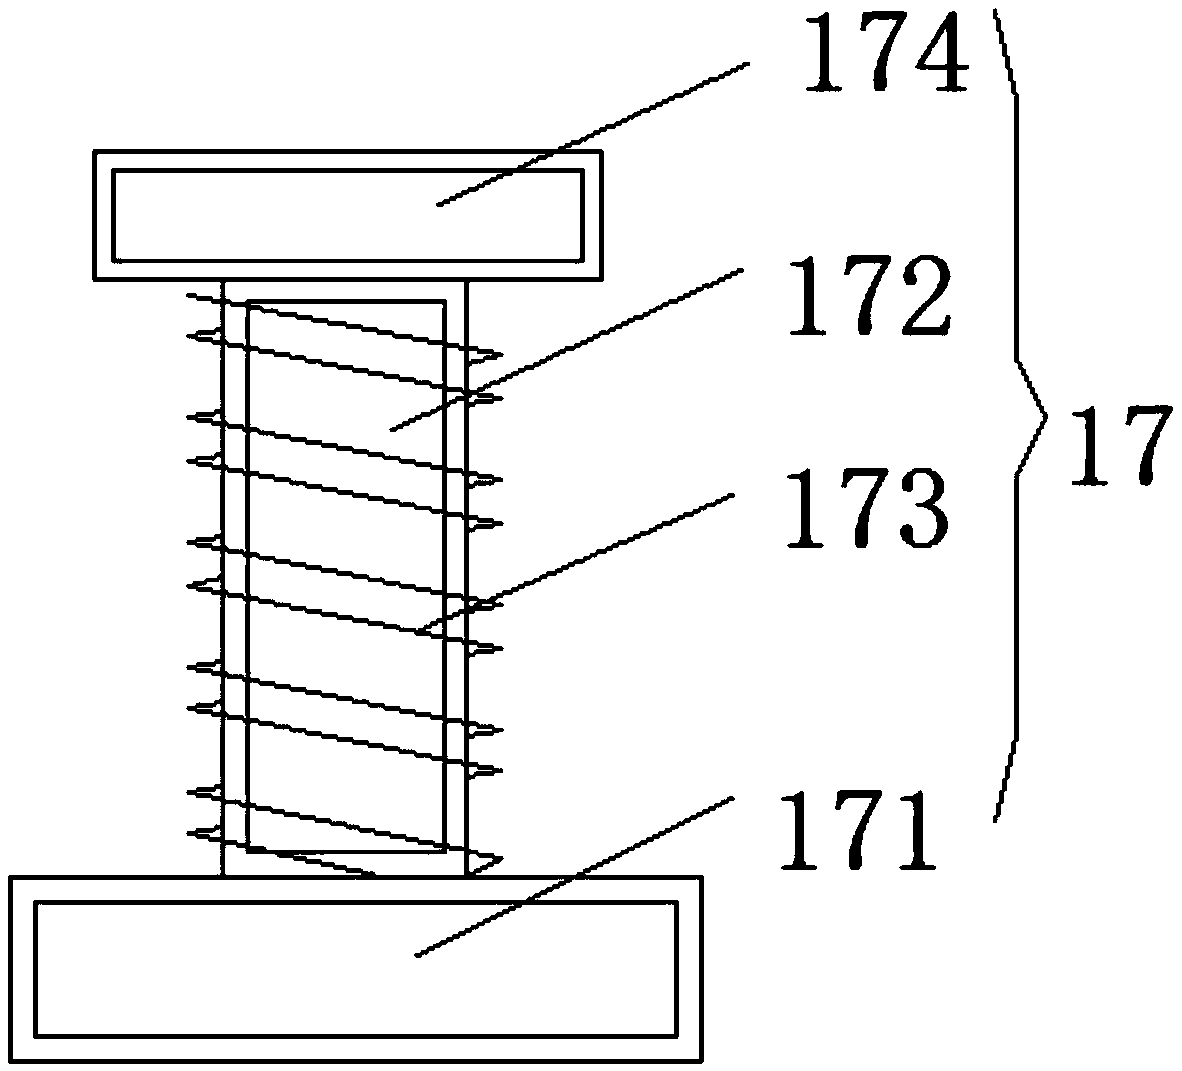 Offshore tidal wind power generation device and power generation method